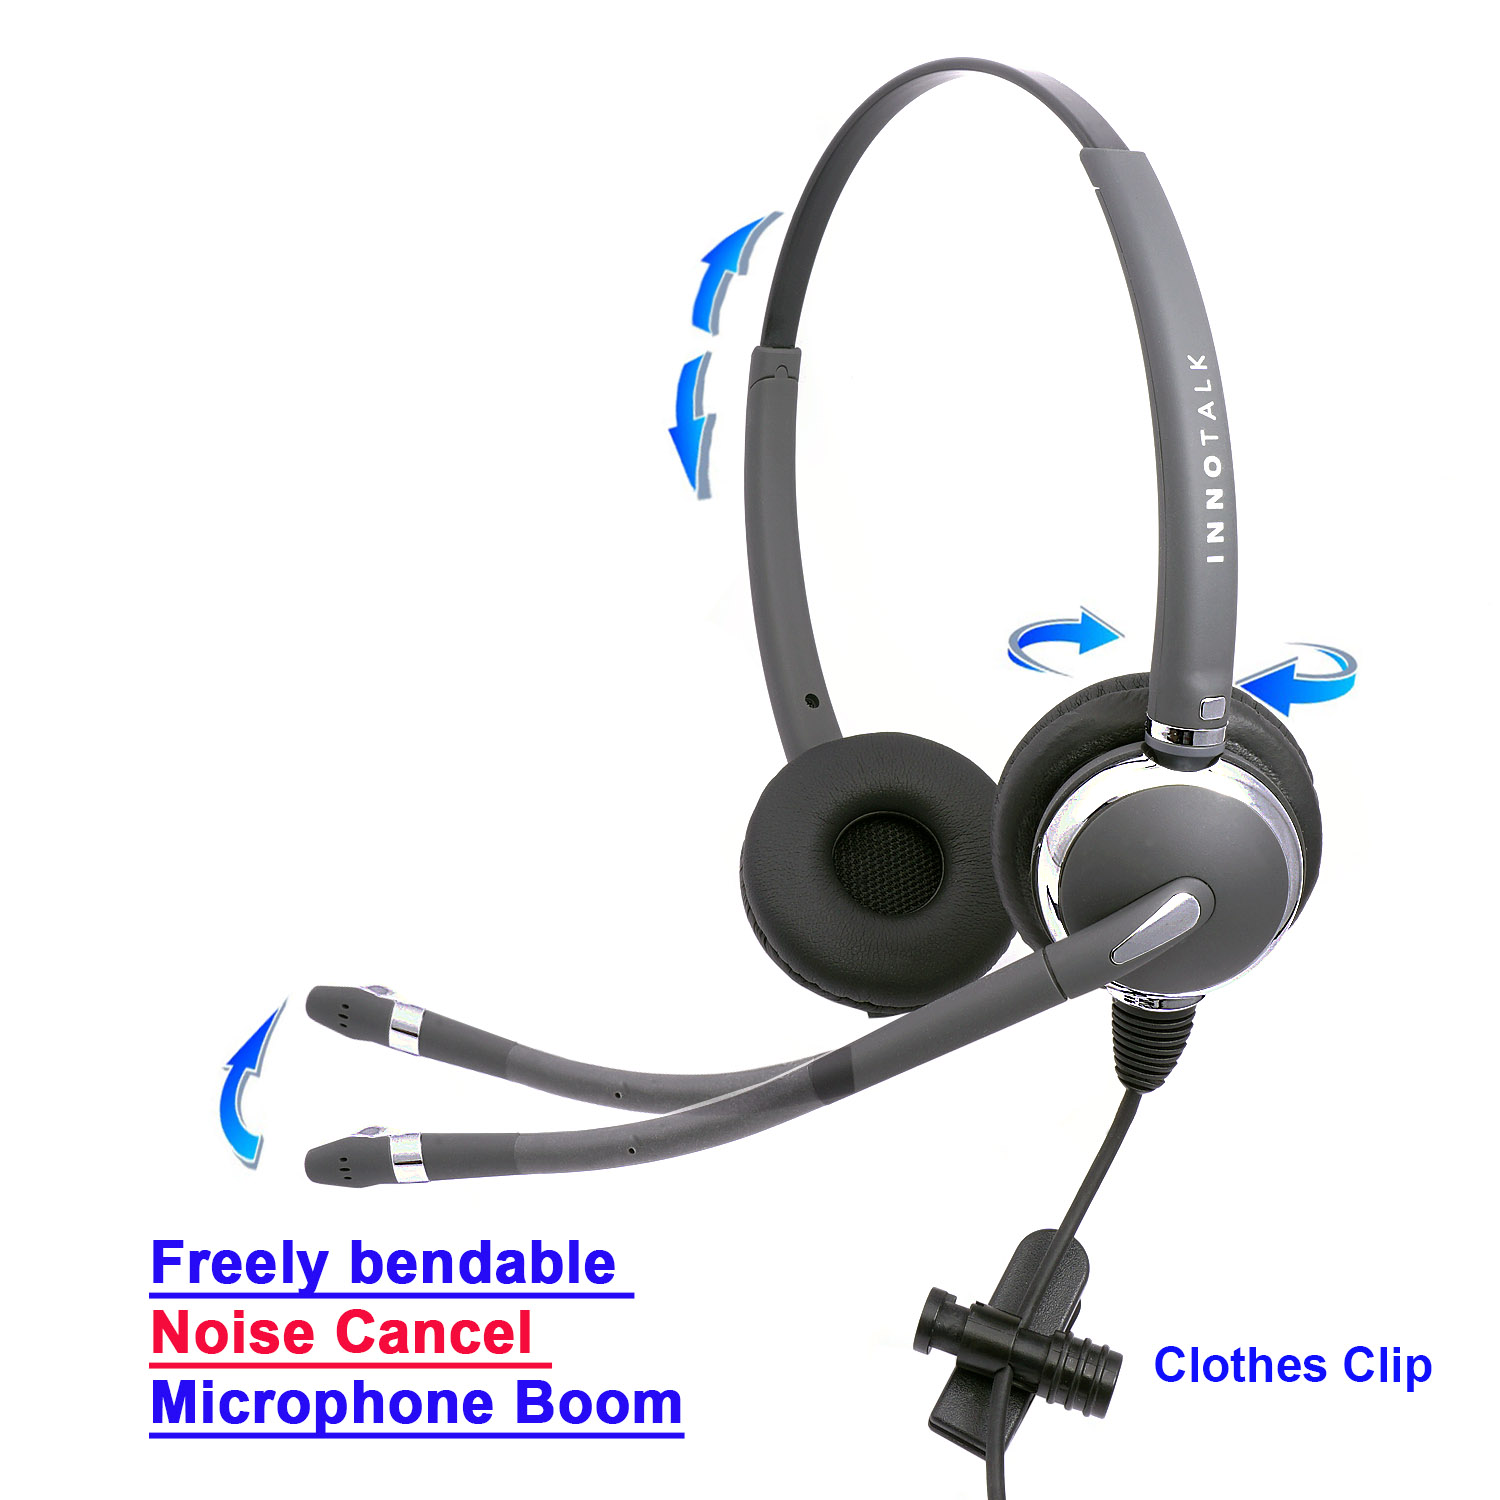 Plantronics Compatible QD 2.5mm Headset Combo - Best Pro Binaural Headset + 2.5 mm headset jack as Office Headset - image 5 of 7